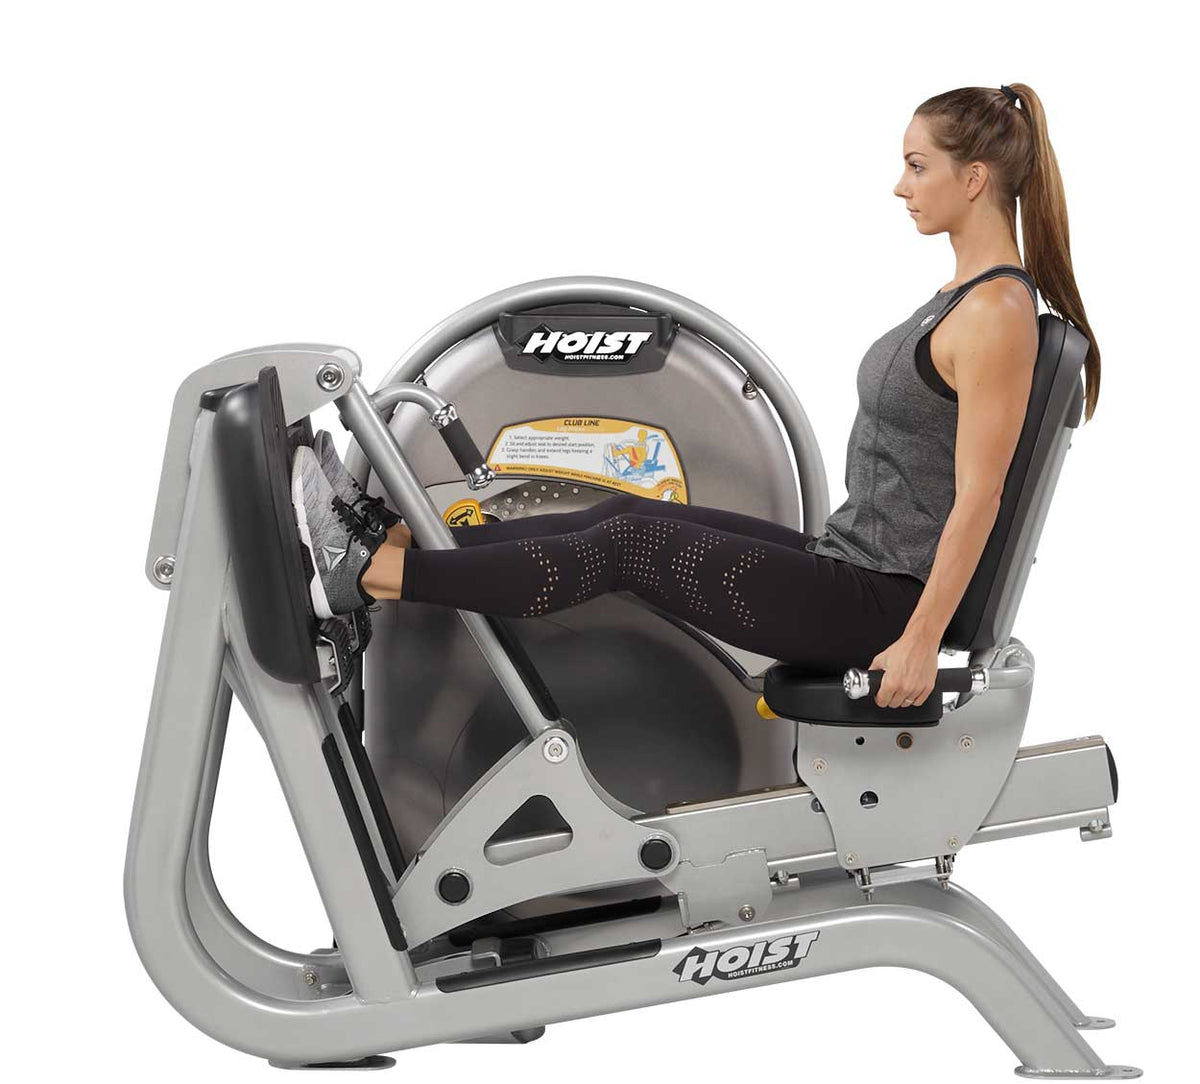 Hoist Fitness CL-3403 Leg Press HS view in use | Fitness Experience